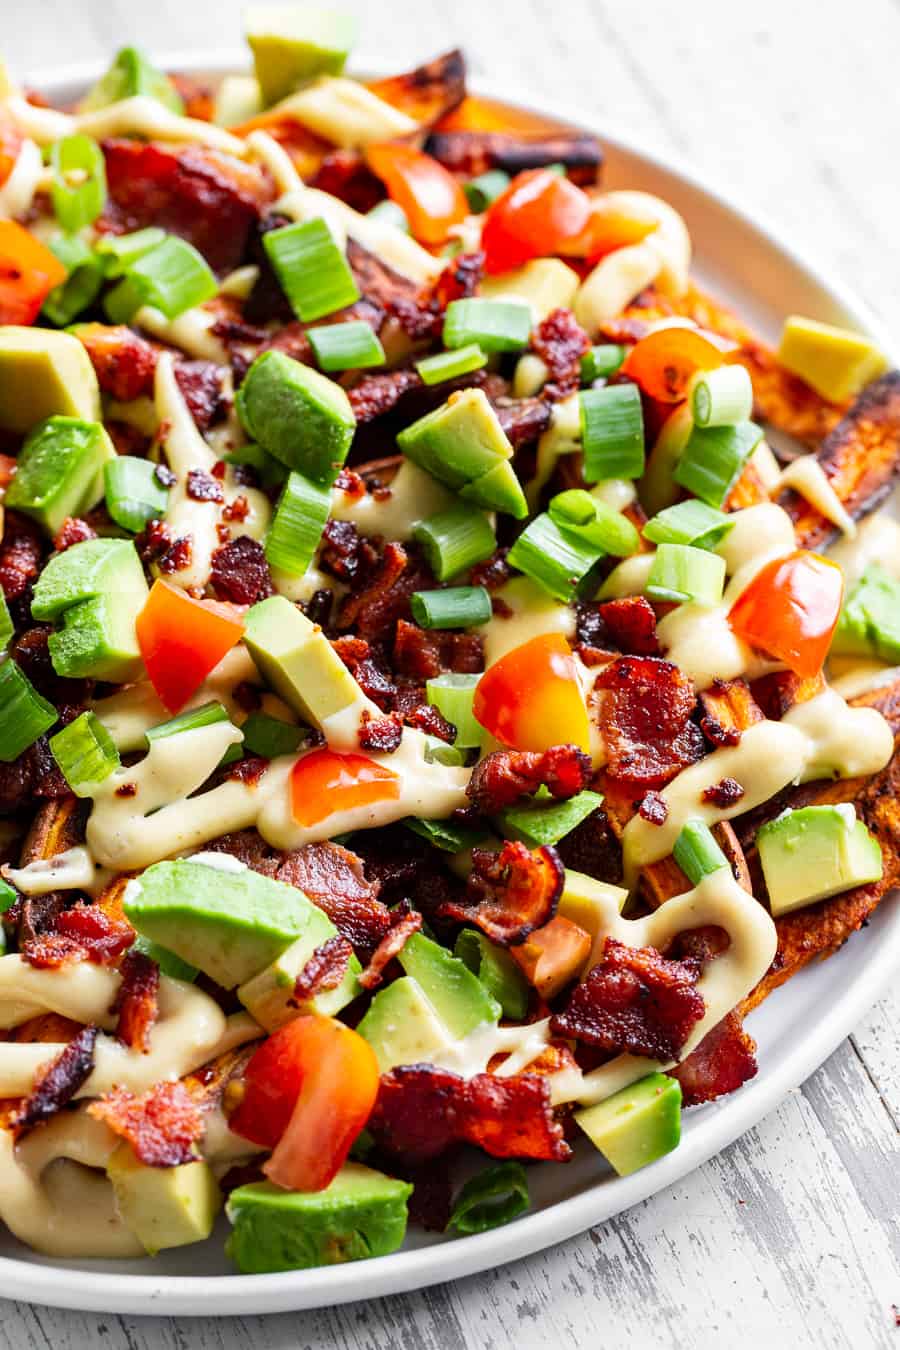 These loaded sweet potato fries are easy to make and packed with goodies! Sweet potato fries are baked crispy and topped with plenty of No Sugar Hickory Smoked Bacon from @jonesdairyfarm, dairy-free cheese sauce, green onions, avocado and tomatoes. This fun meal or appetizer is kid approved, paleo, Whole30 compliant and seriously tasty! #Whole30 #paleo #cleaneating #AD